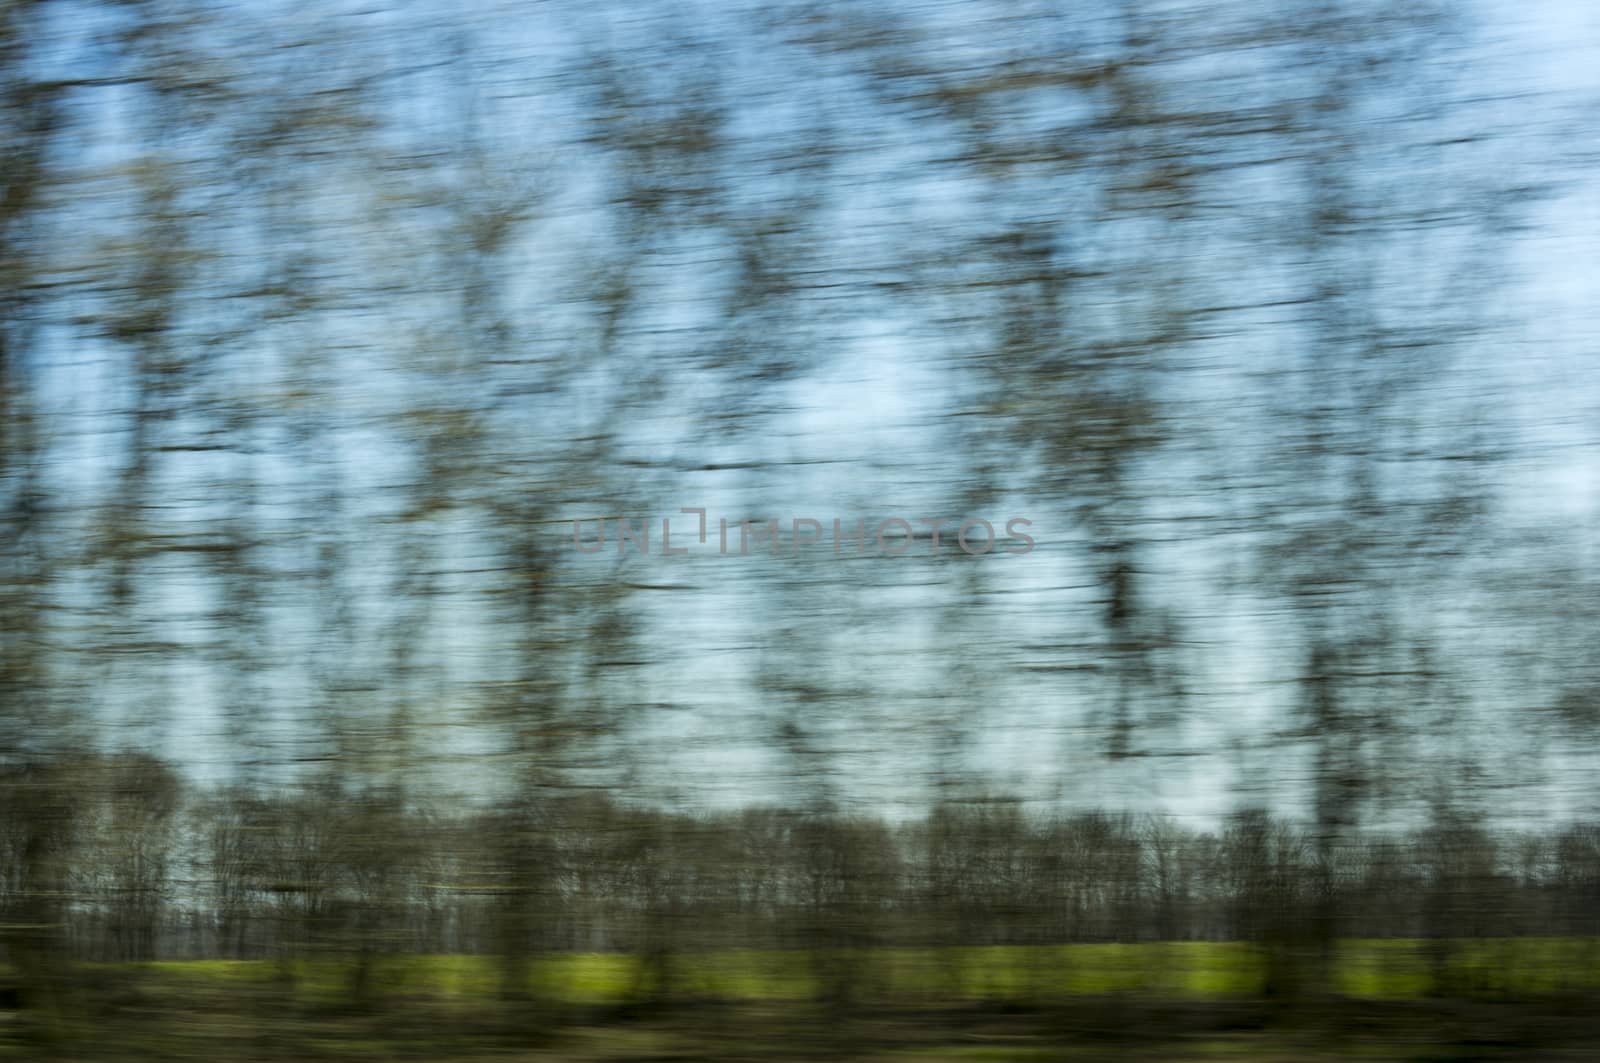 green trees - a blurred window view from a train in motion.